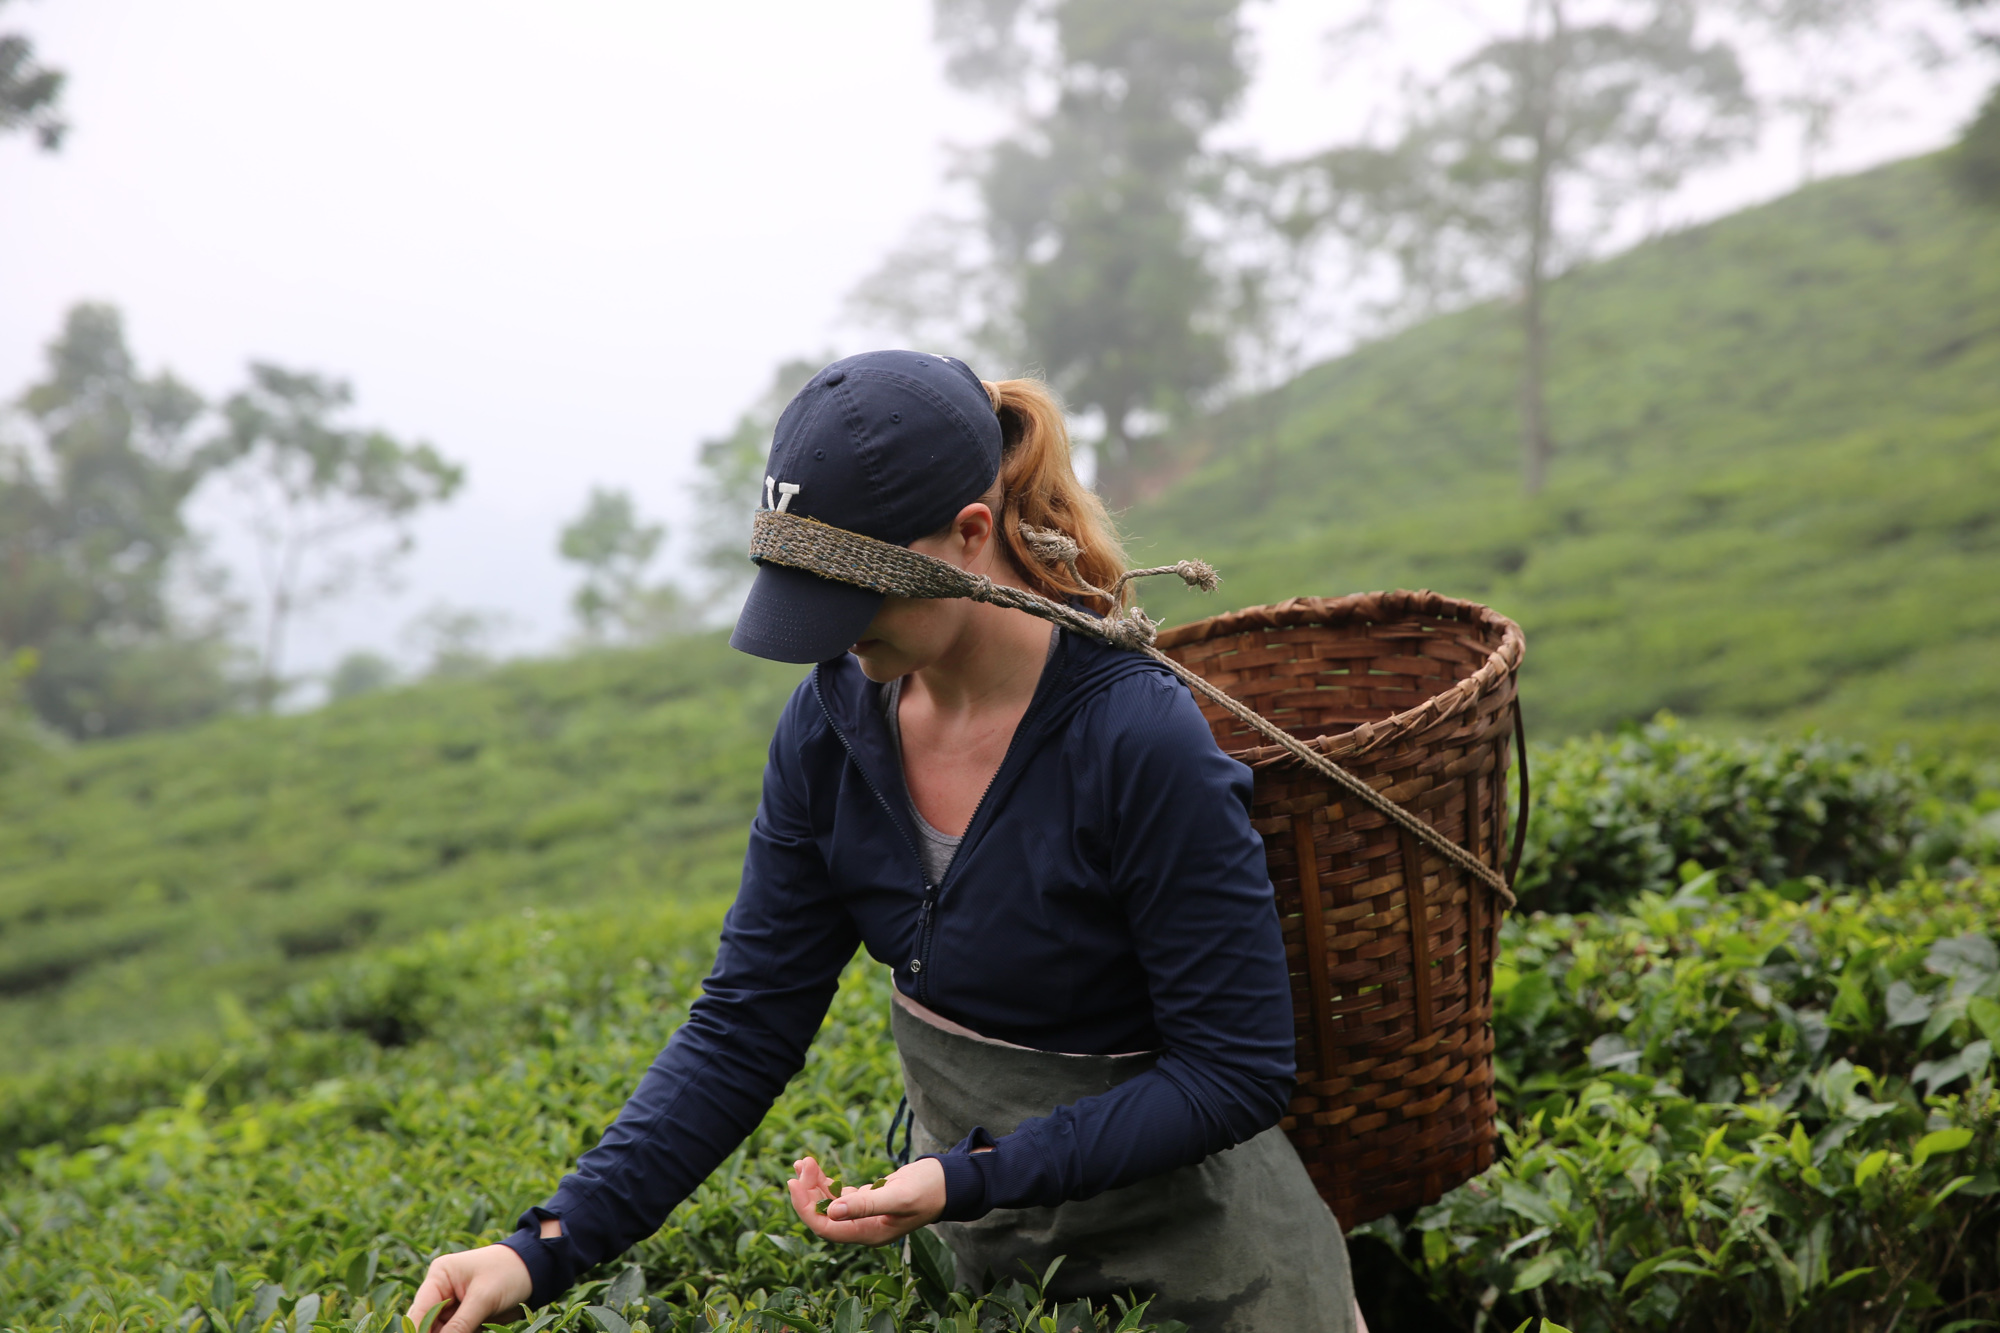 Courtesy. Abigail StClair, founder and CEO of TeBella Tea Co., has led the company’s growth since its founding in 2010. TeBella now has four retail stores, 150 wholesale clients and increasing online sales.